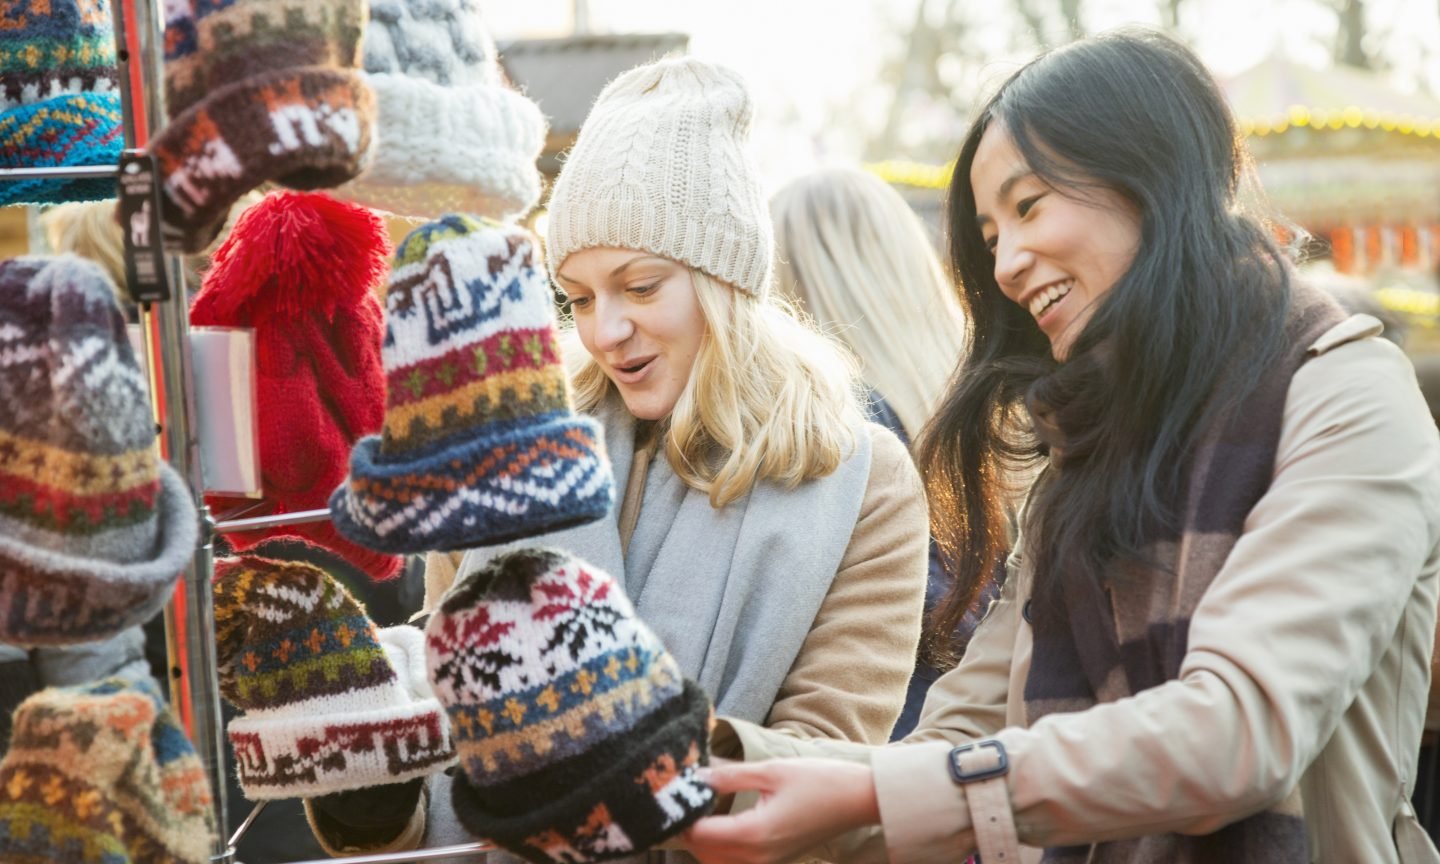 4 Things Retailers Can Do to Prepare for Holiday Shoppers